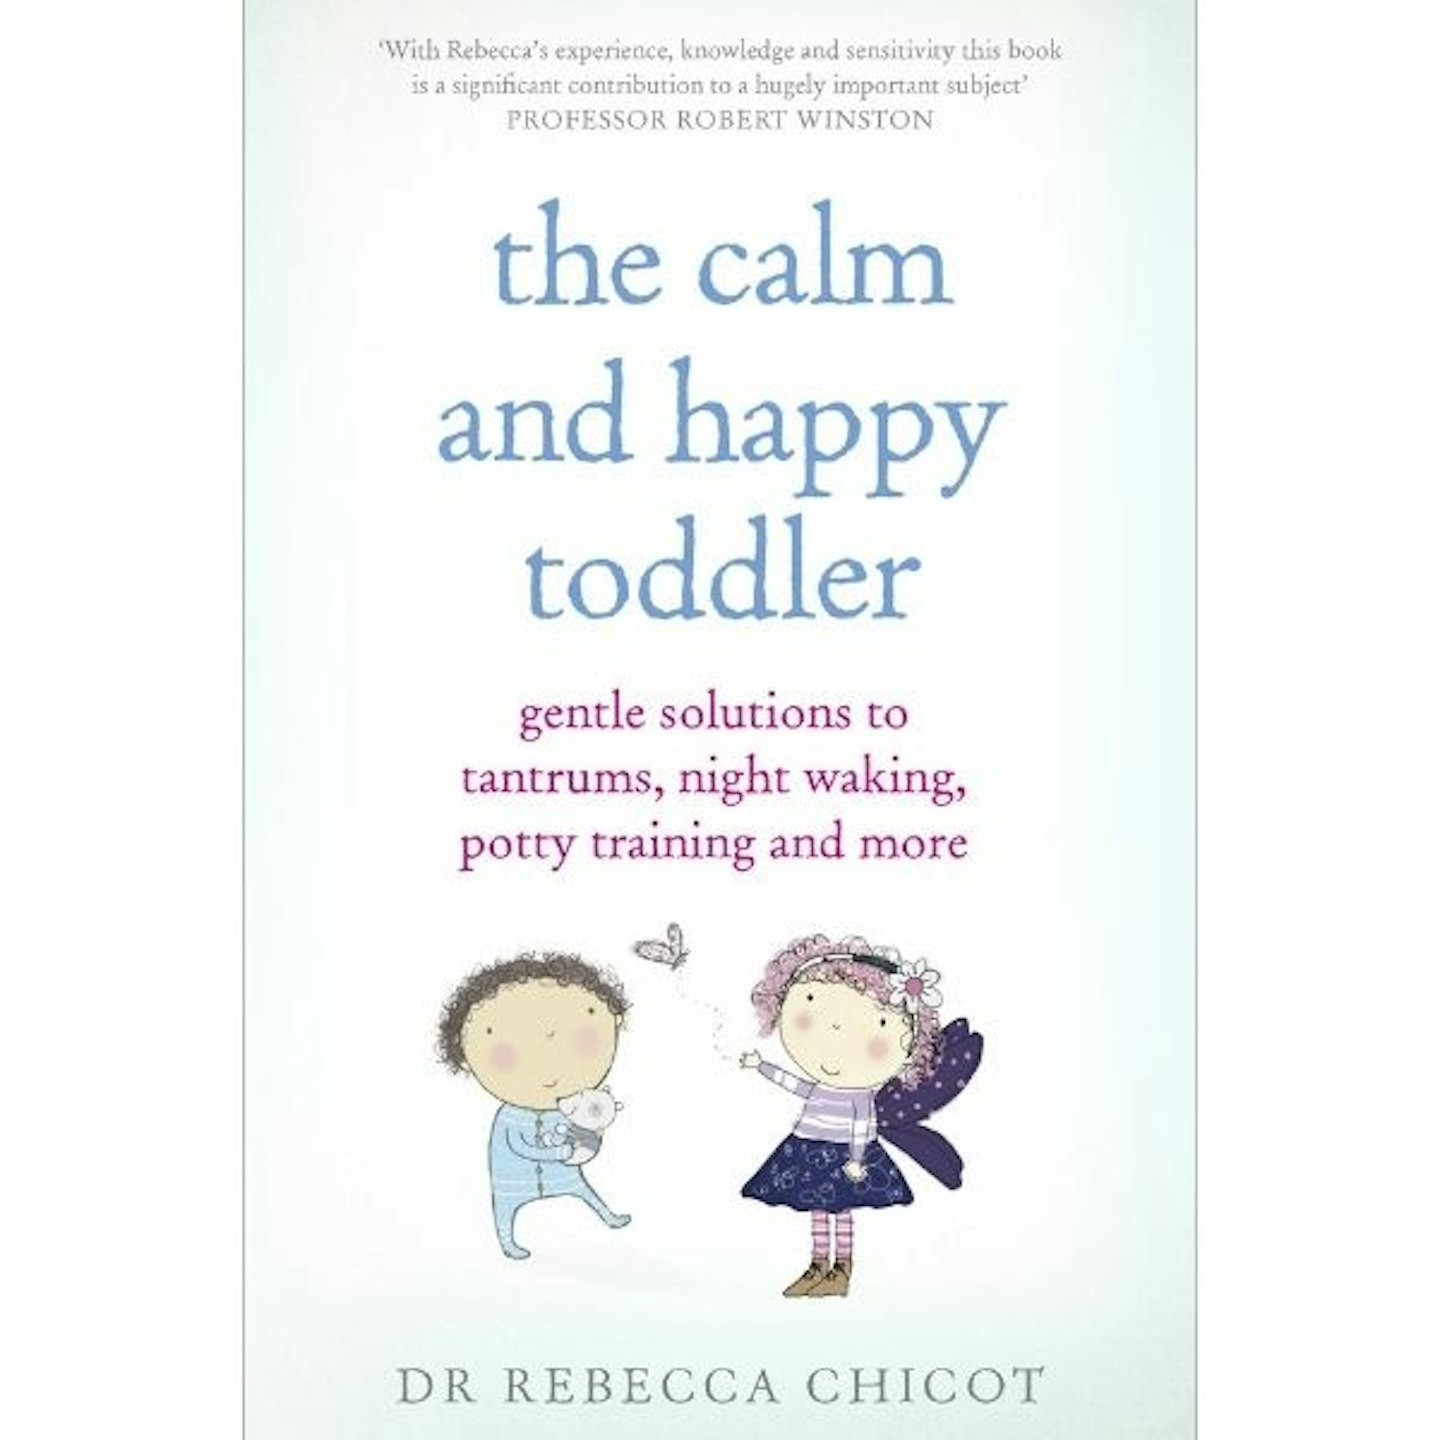 The Calm And Happy Toddler, By Dr Rebecca Chicot